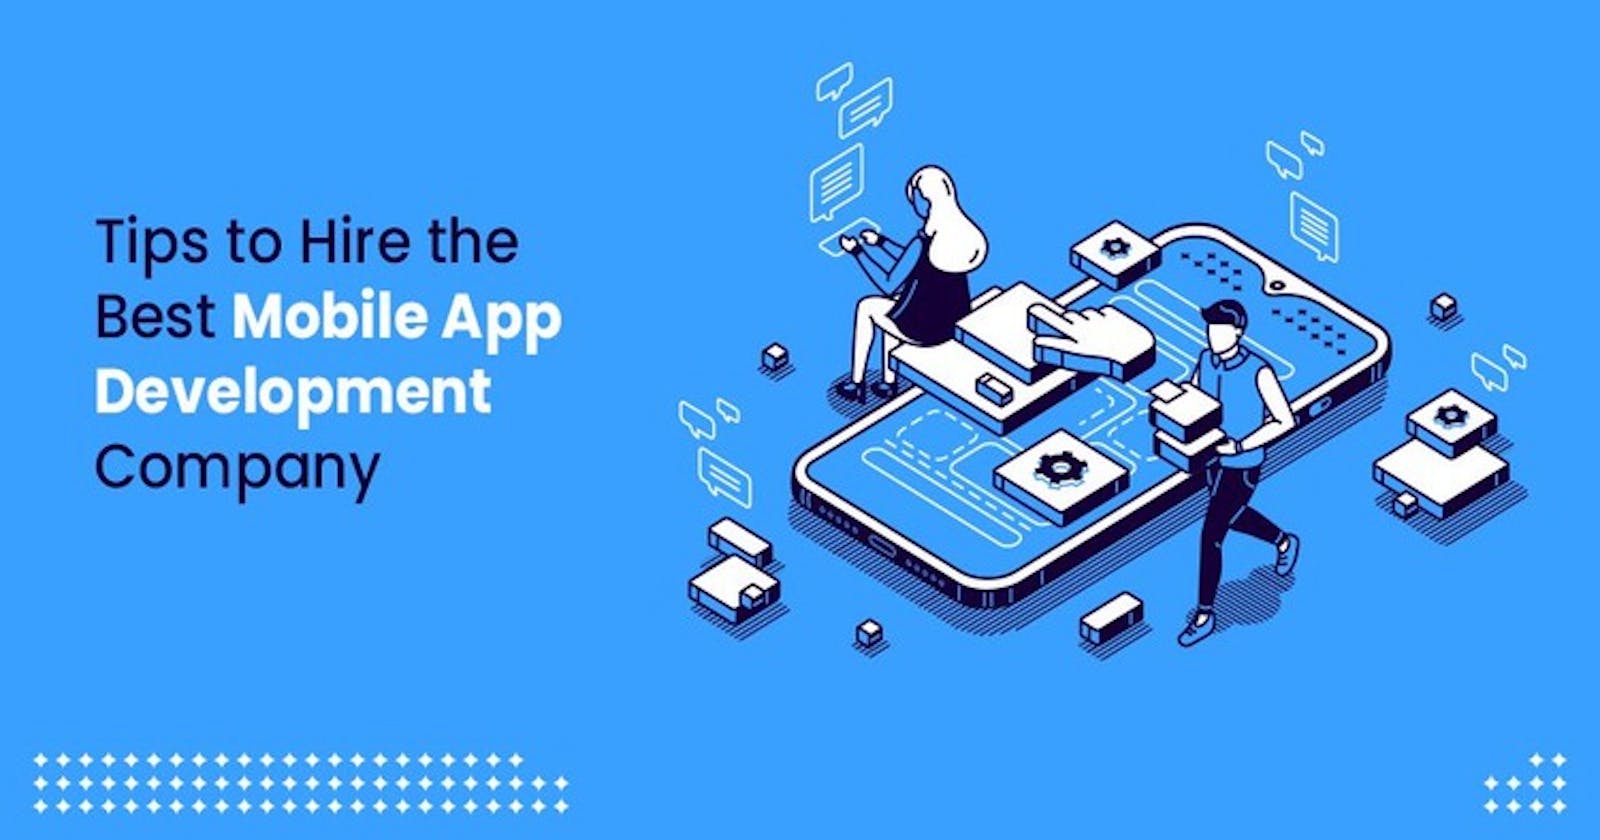 Top Tips to Hire Mobile App Development Company